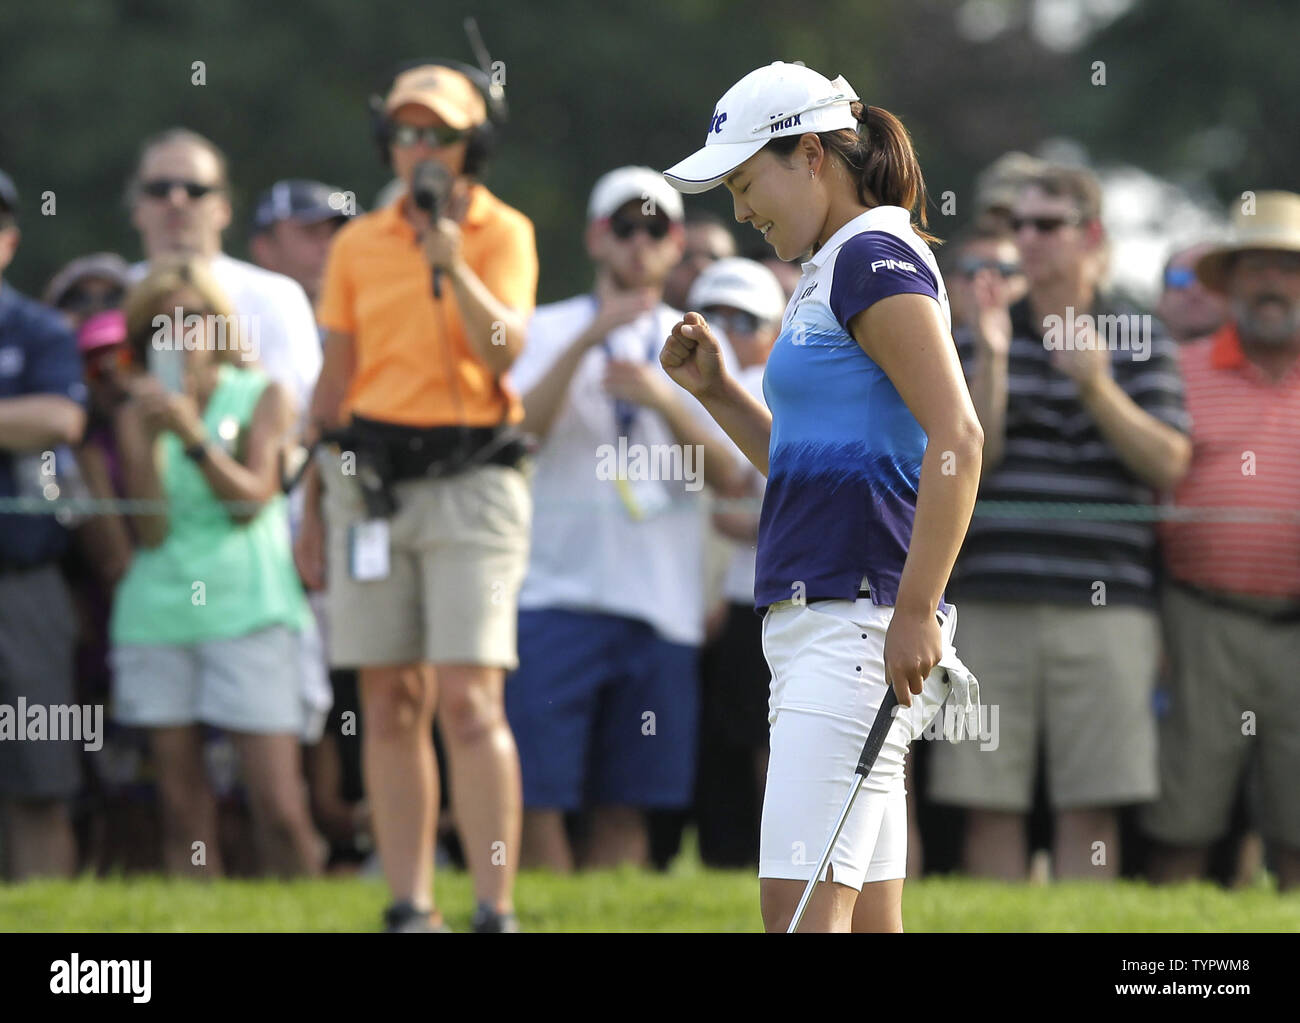 In Gee Chun of Korea celebrates after making a birdie putt on the 17th green in the final round of the LPGA U.S. Women's Open Championship at Lancaster Country Club in Lancaster, PA on July 12, 2015. Chun wins the U.S. Women's Open and her first LPGA major championship with a score of 8 under par.     Photo by John Angelillo/UPI Stock Photo